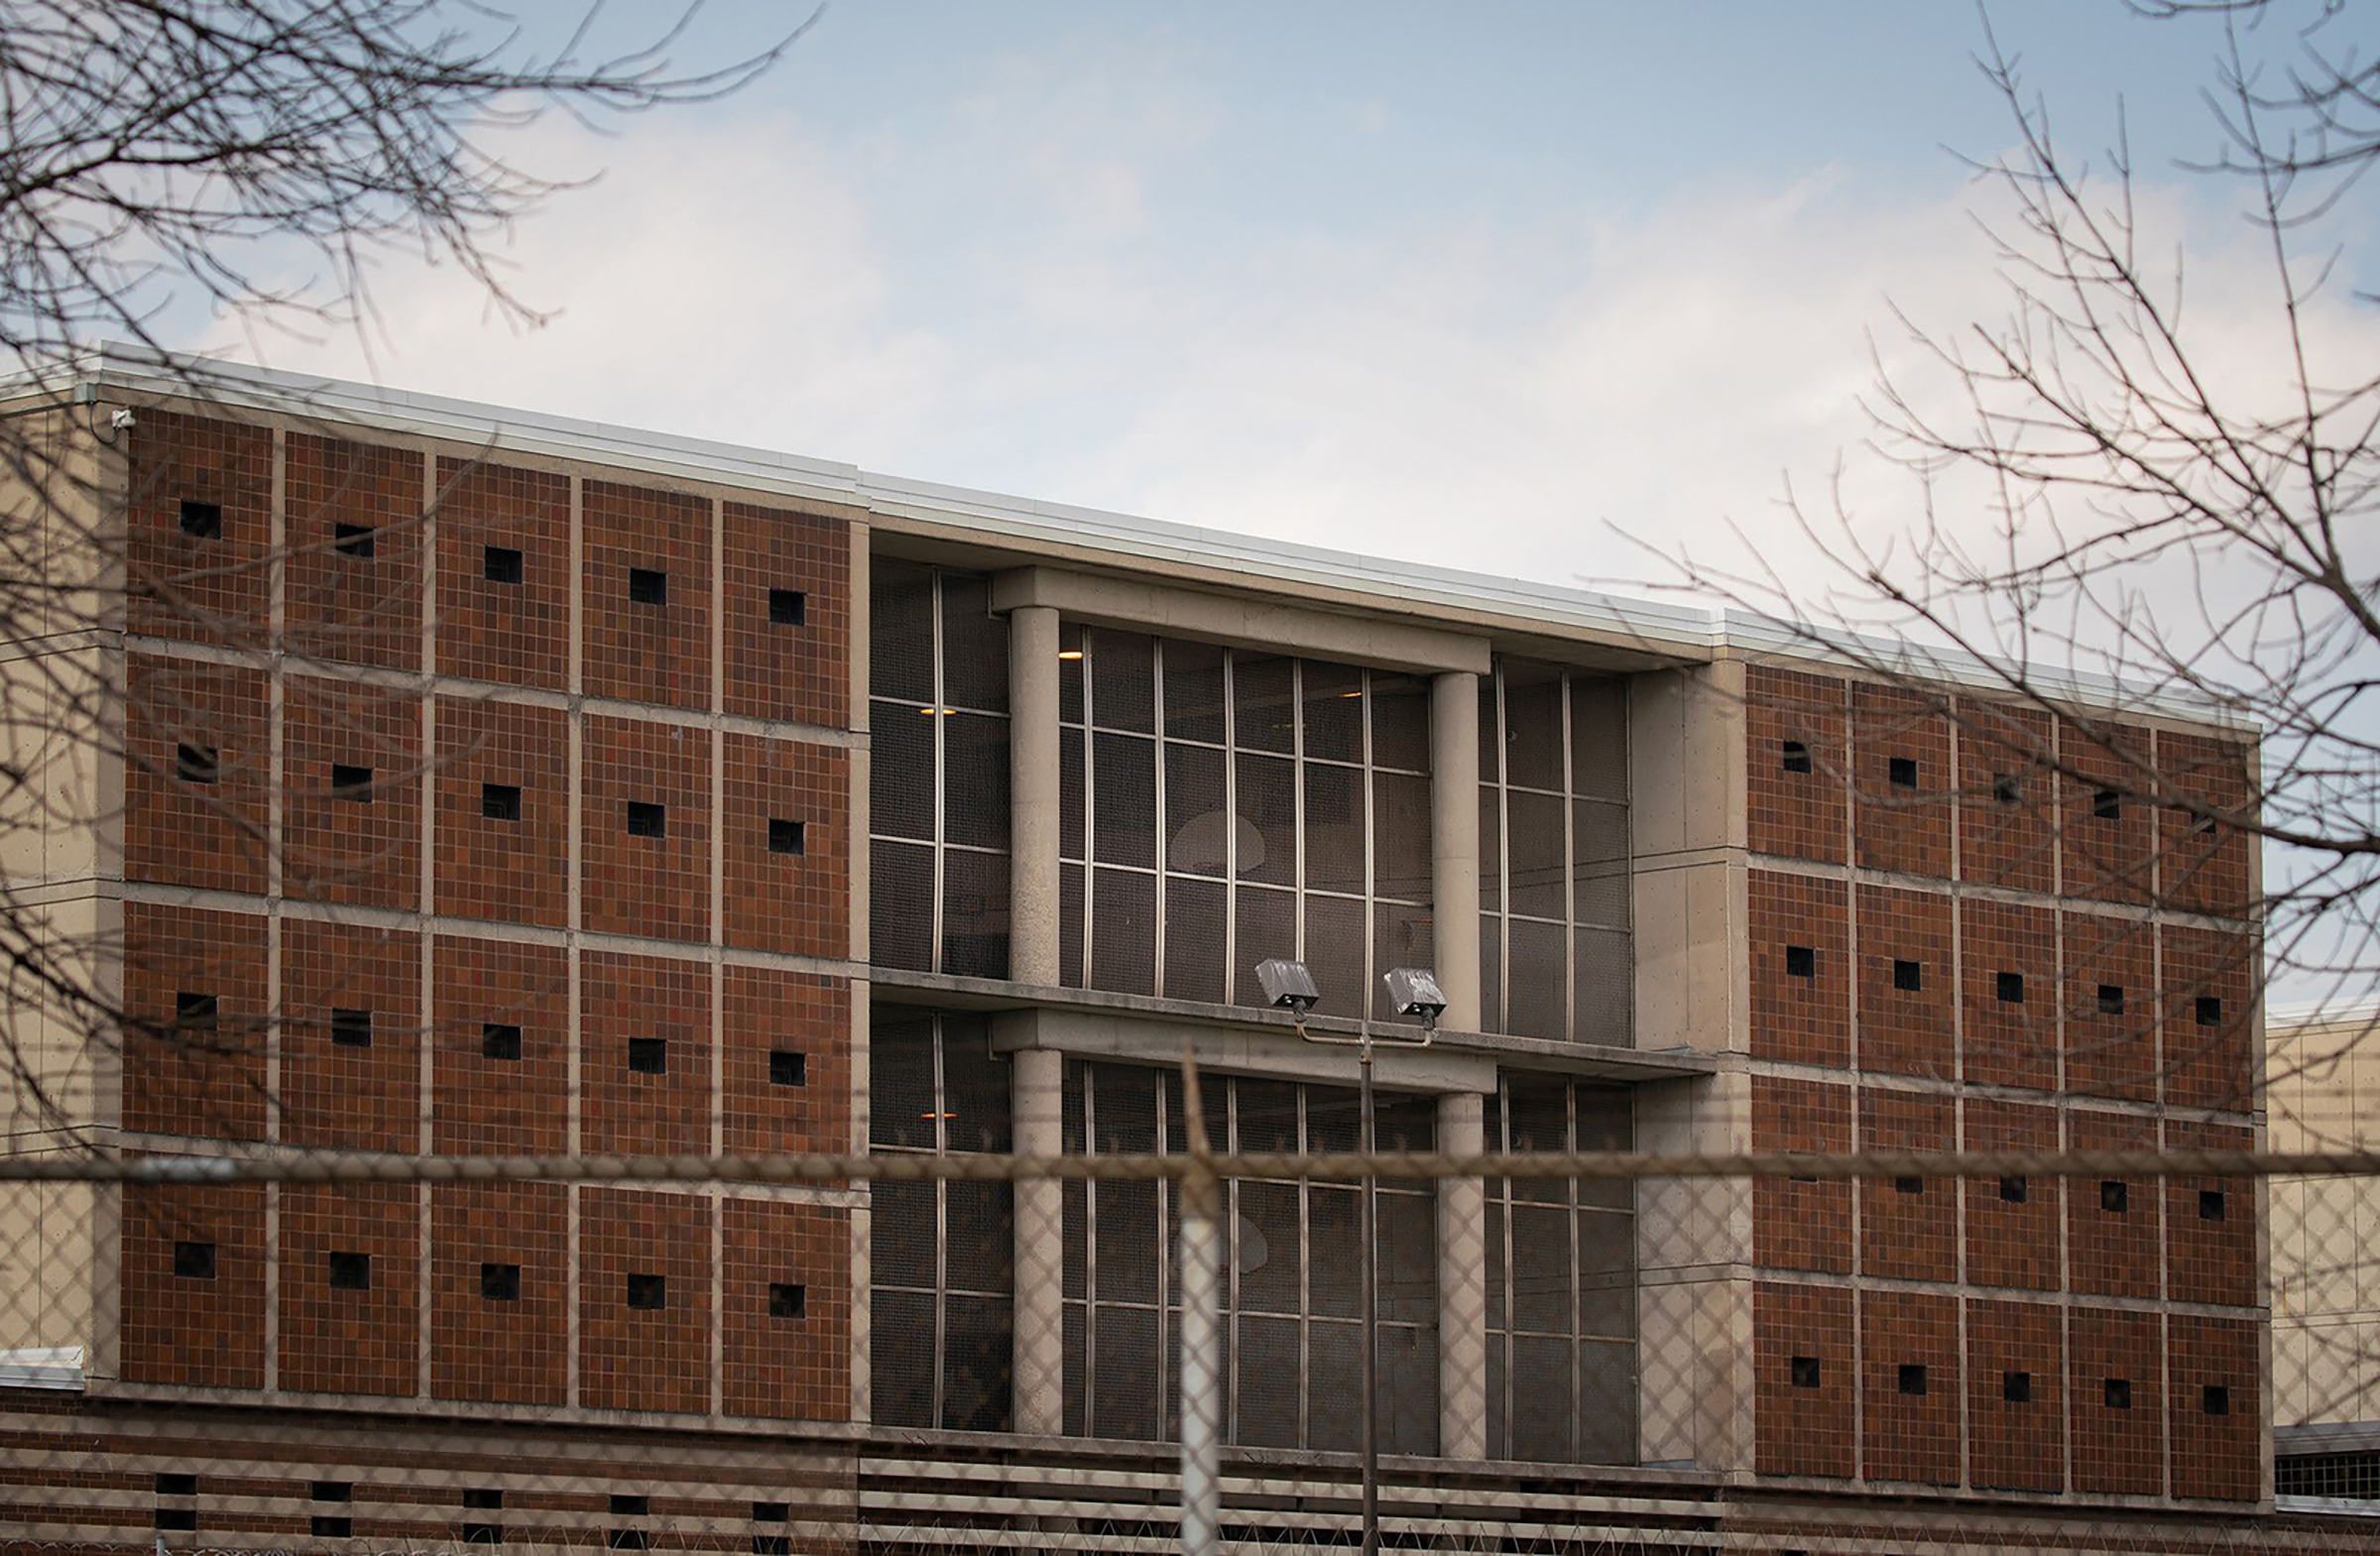 Cook County Jail on April 7